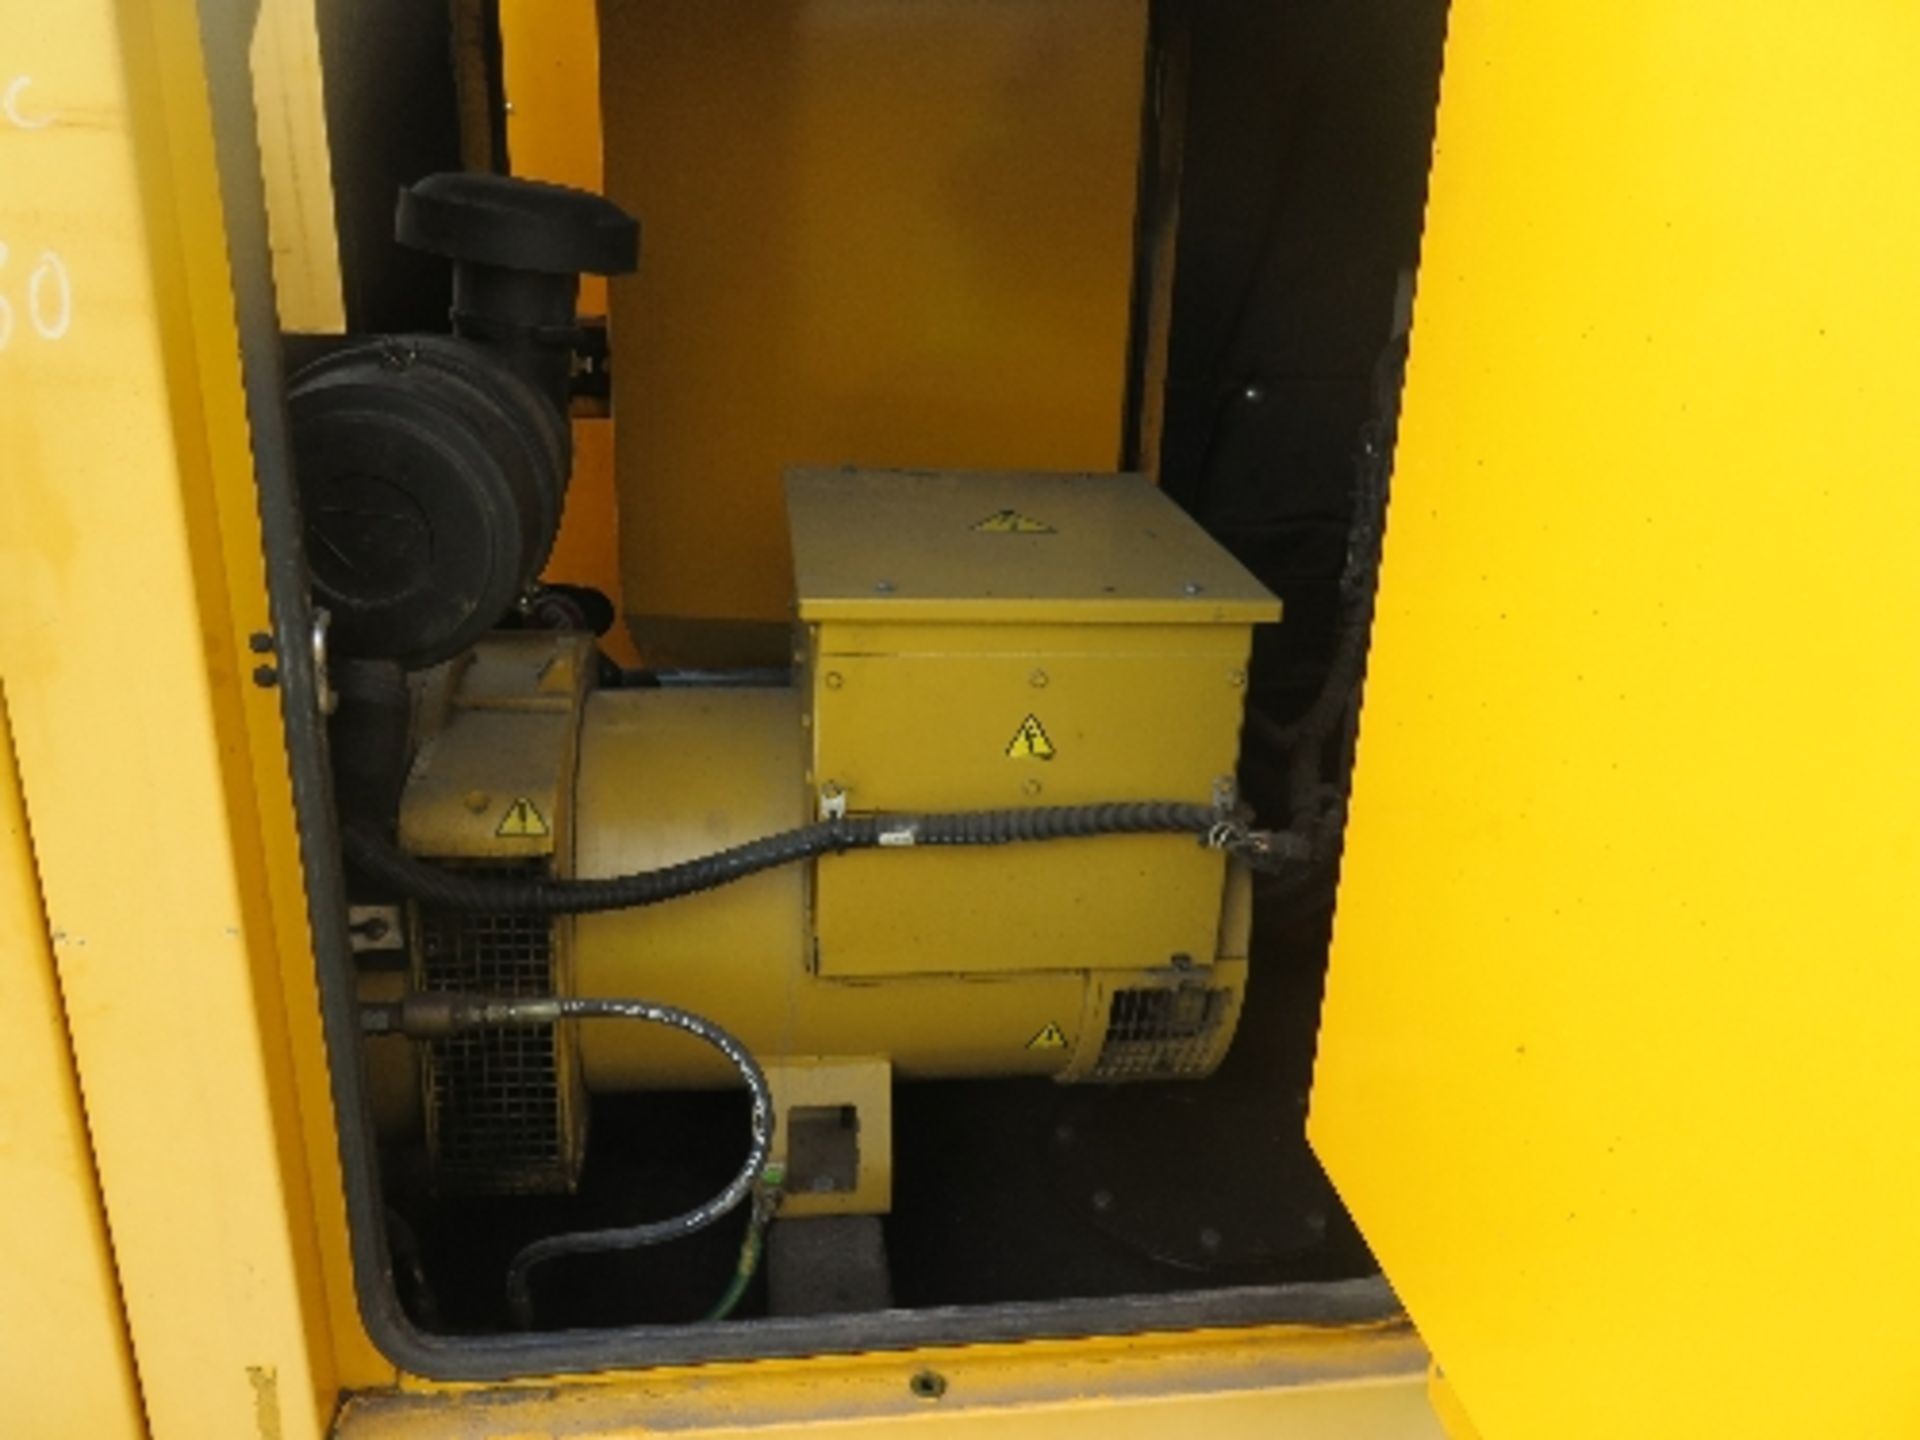 Caterpillar XQE80 generator 11729 hrs 157805
PERKINS - RUNS AND MAKES POWER
ALL LOTS are SOLD AS - Image 4 of 6